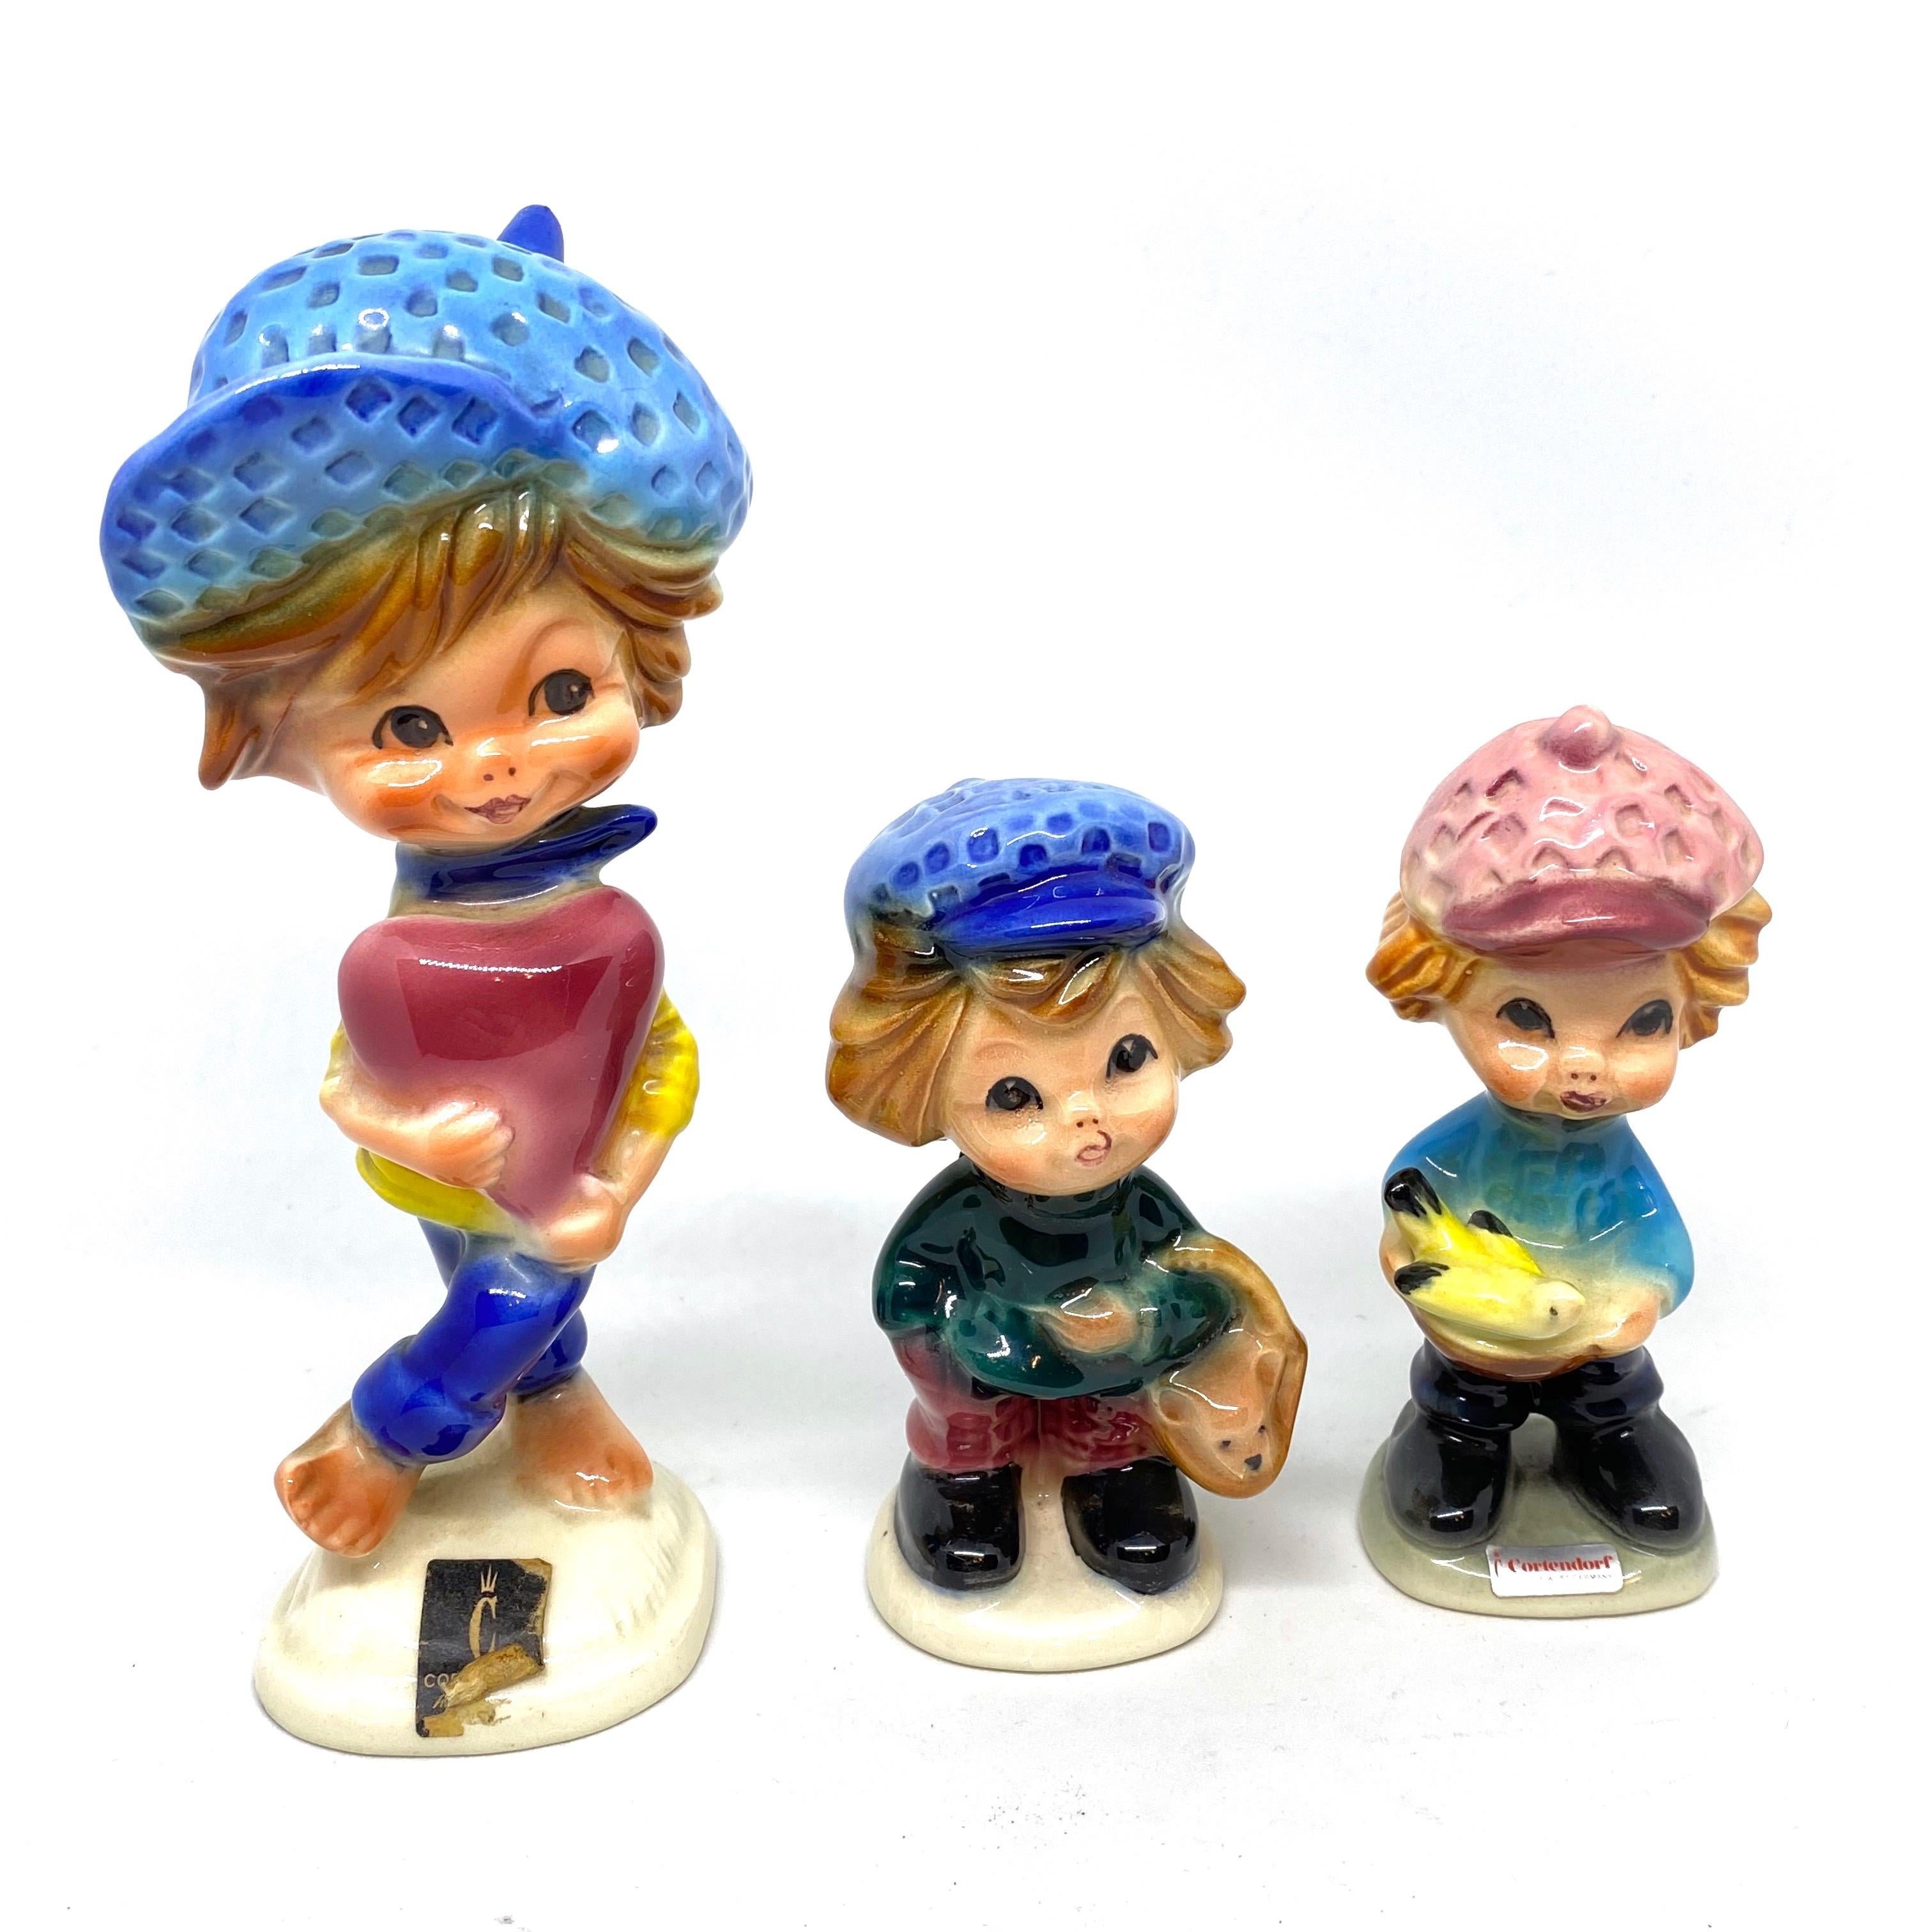 A collection of 1960s Children figurines made by Cortendorf, Germany. A nice addition to any room. Made of Ceramic. Marked with manufactory label. Tallest approx. 6 5/8